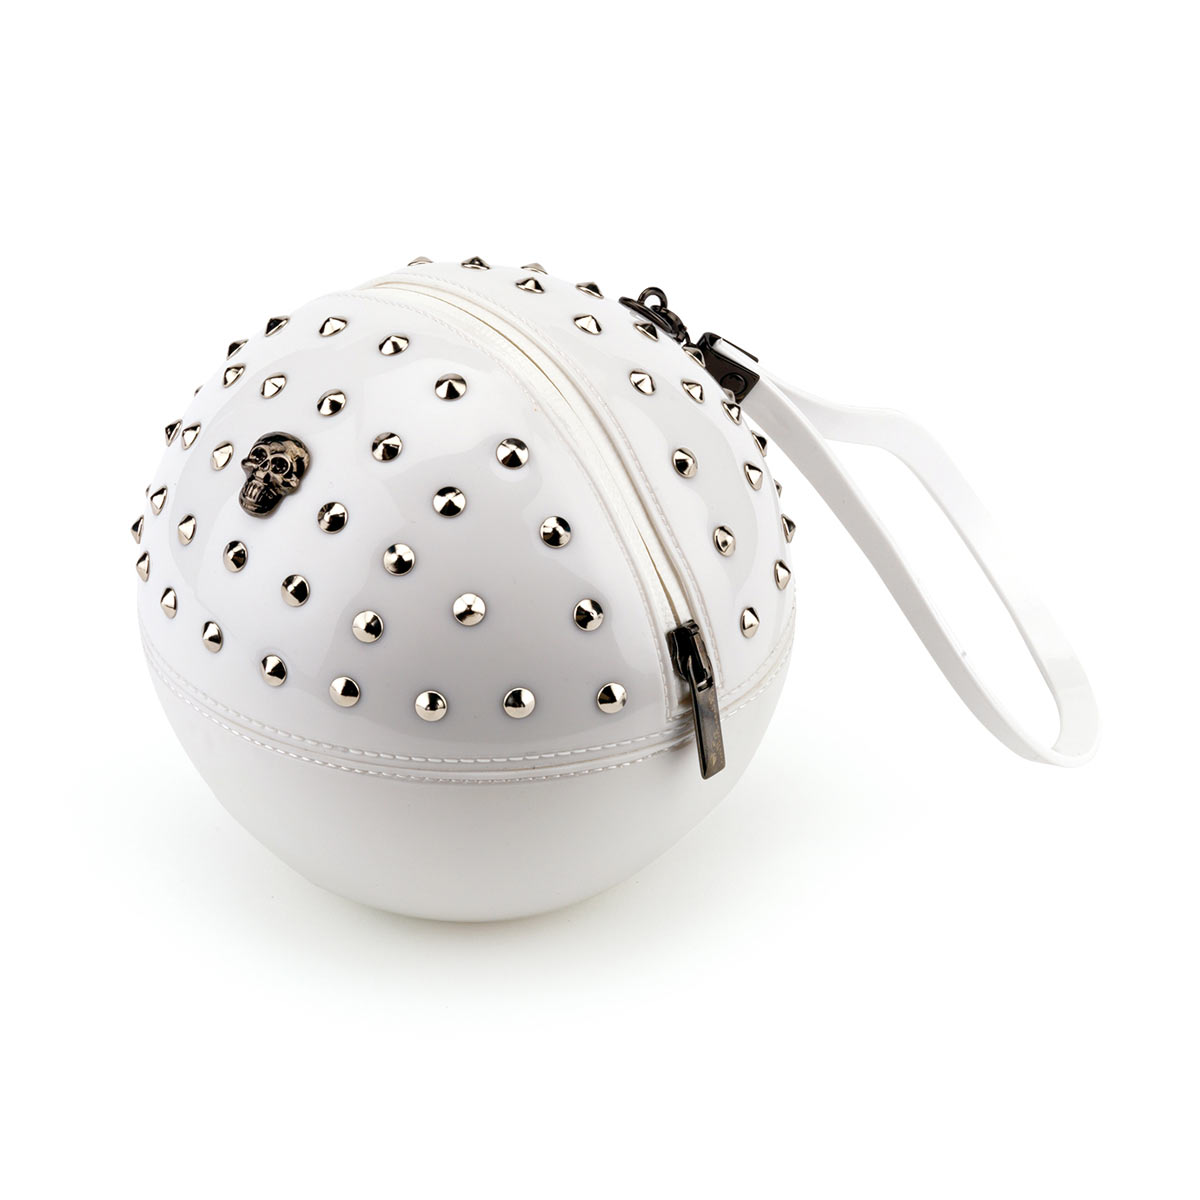 “Rock’n’Ball” sphere handbag, studded in solid colour bright PVC